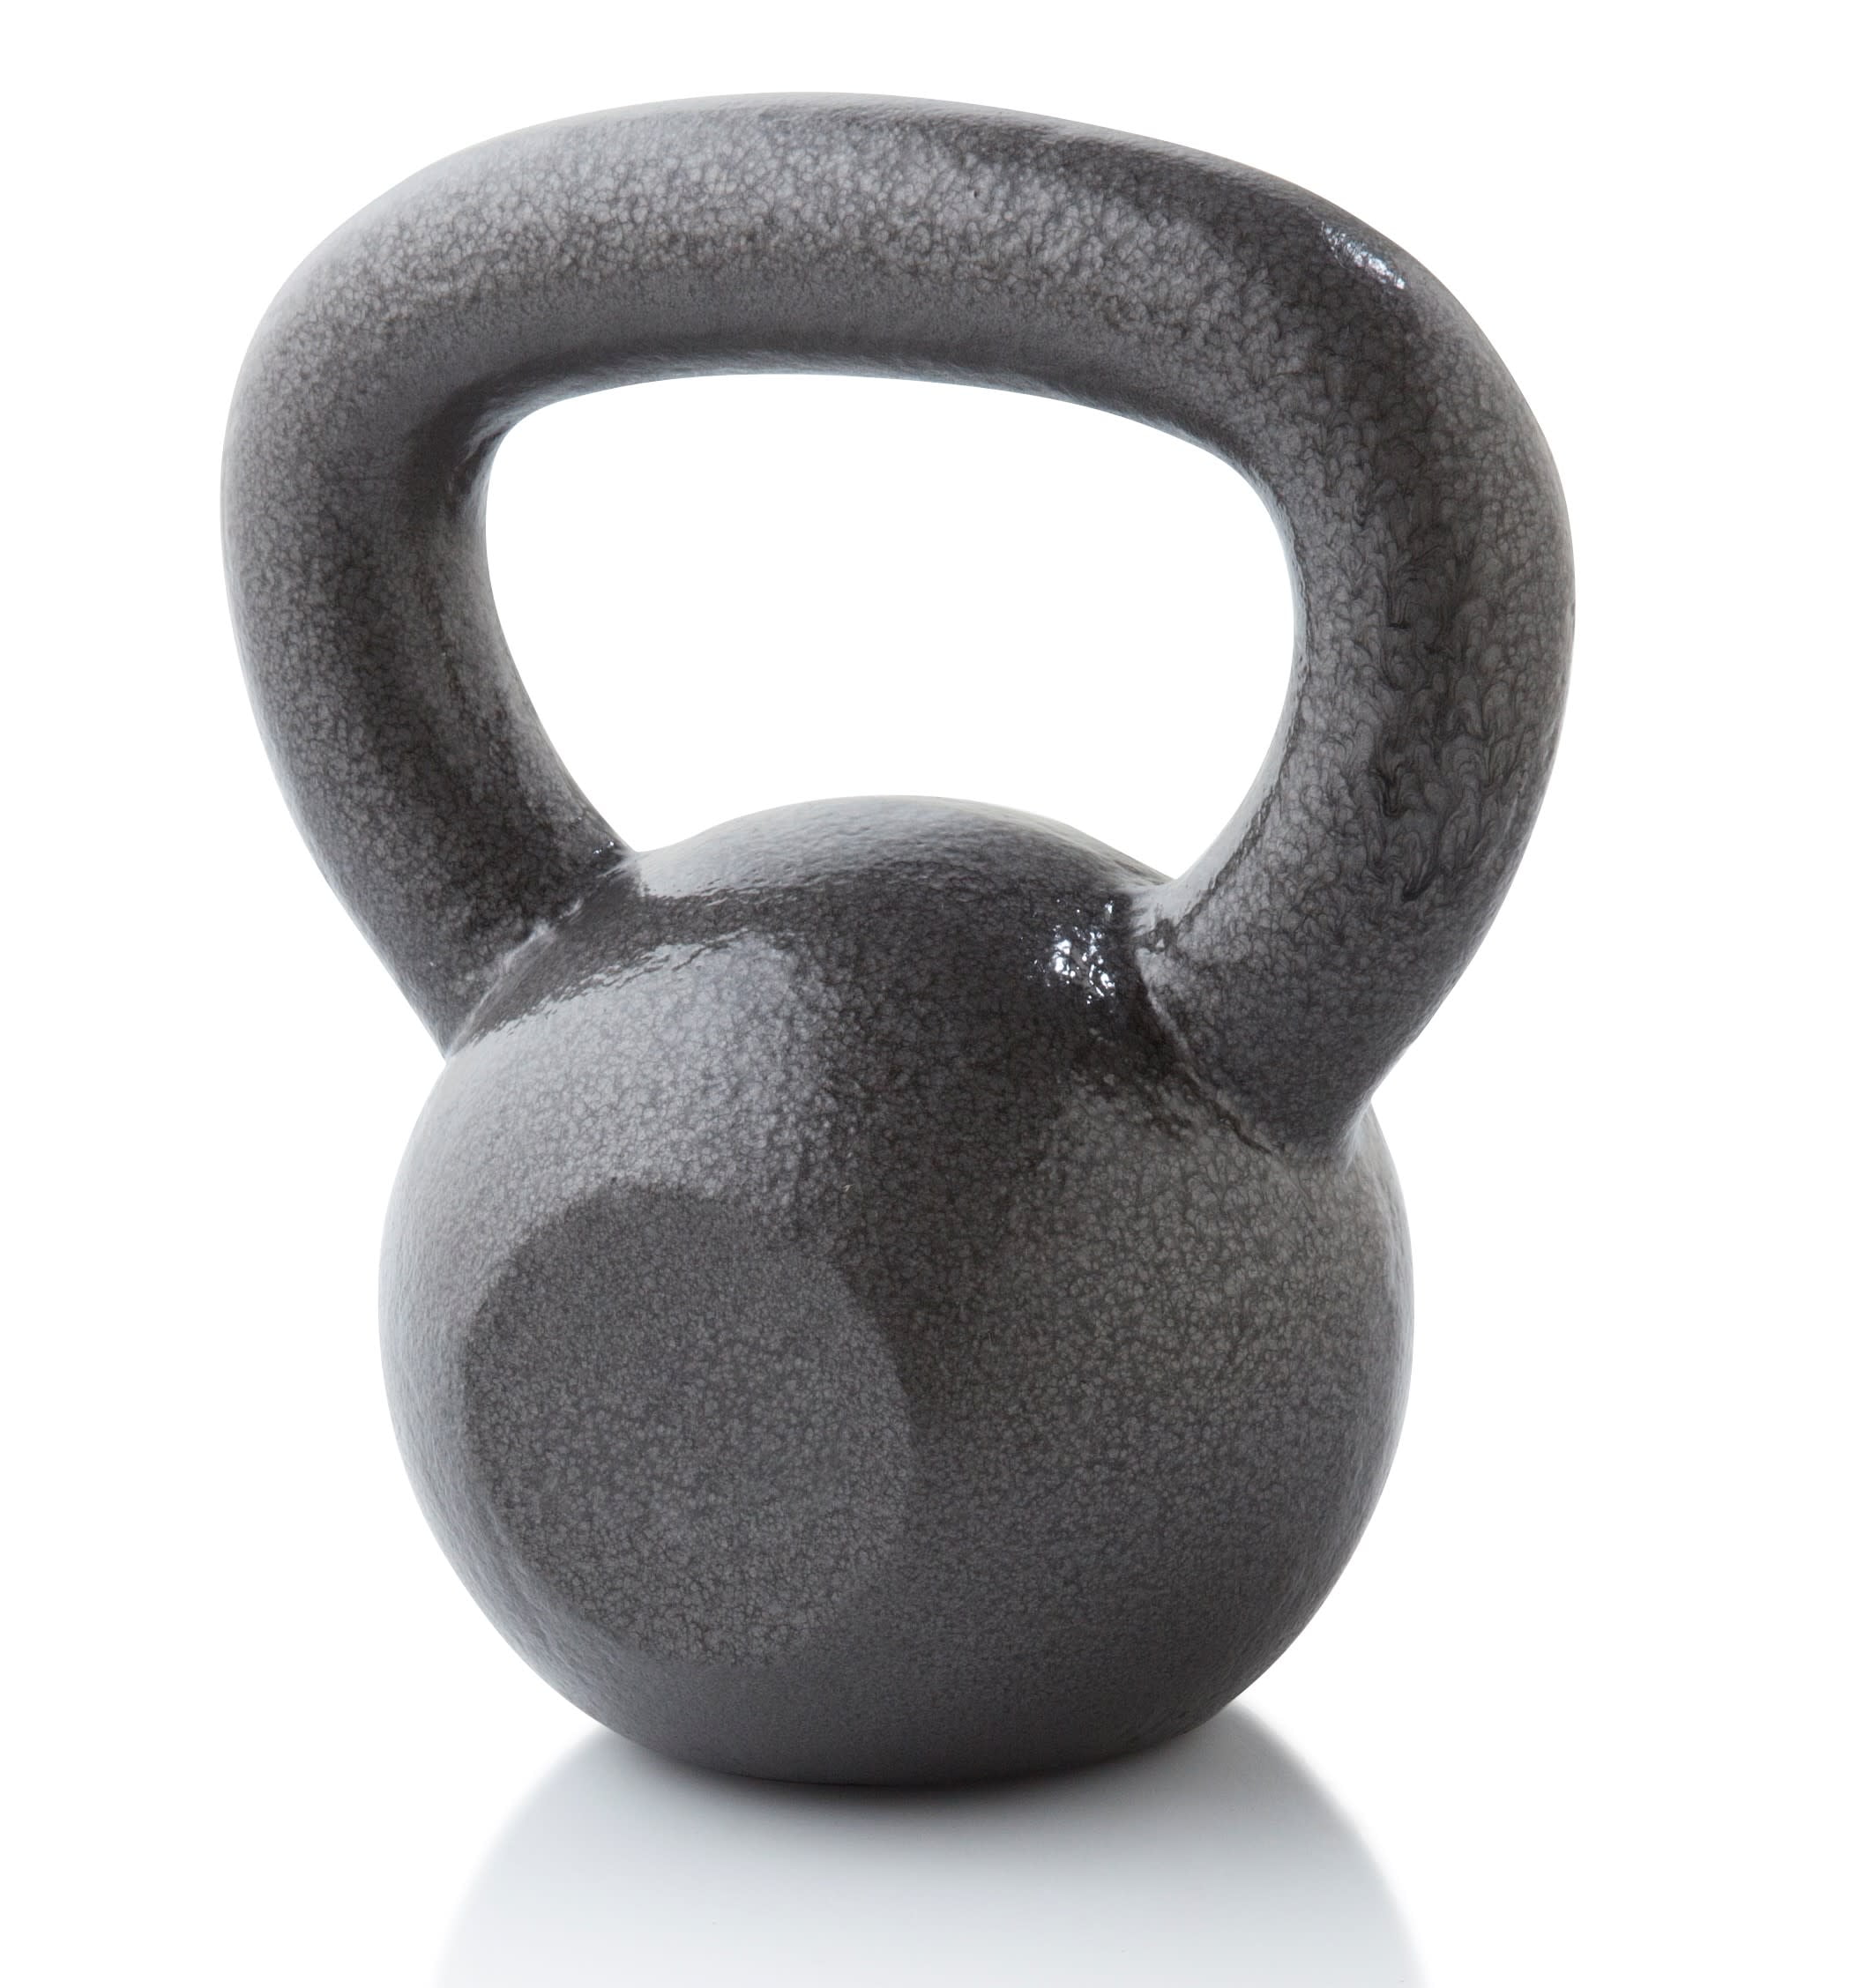 HKB Workout Weights 10 to 55 lbs Marcy Hammertone Kettle Bells 